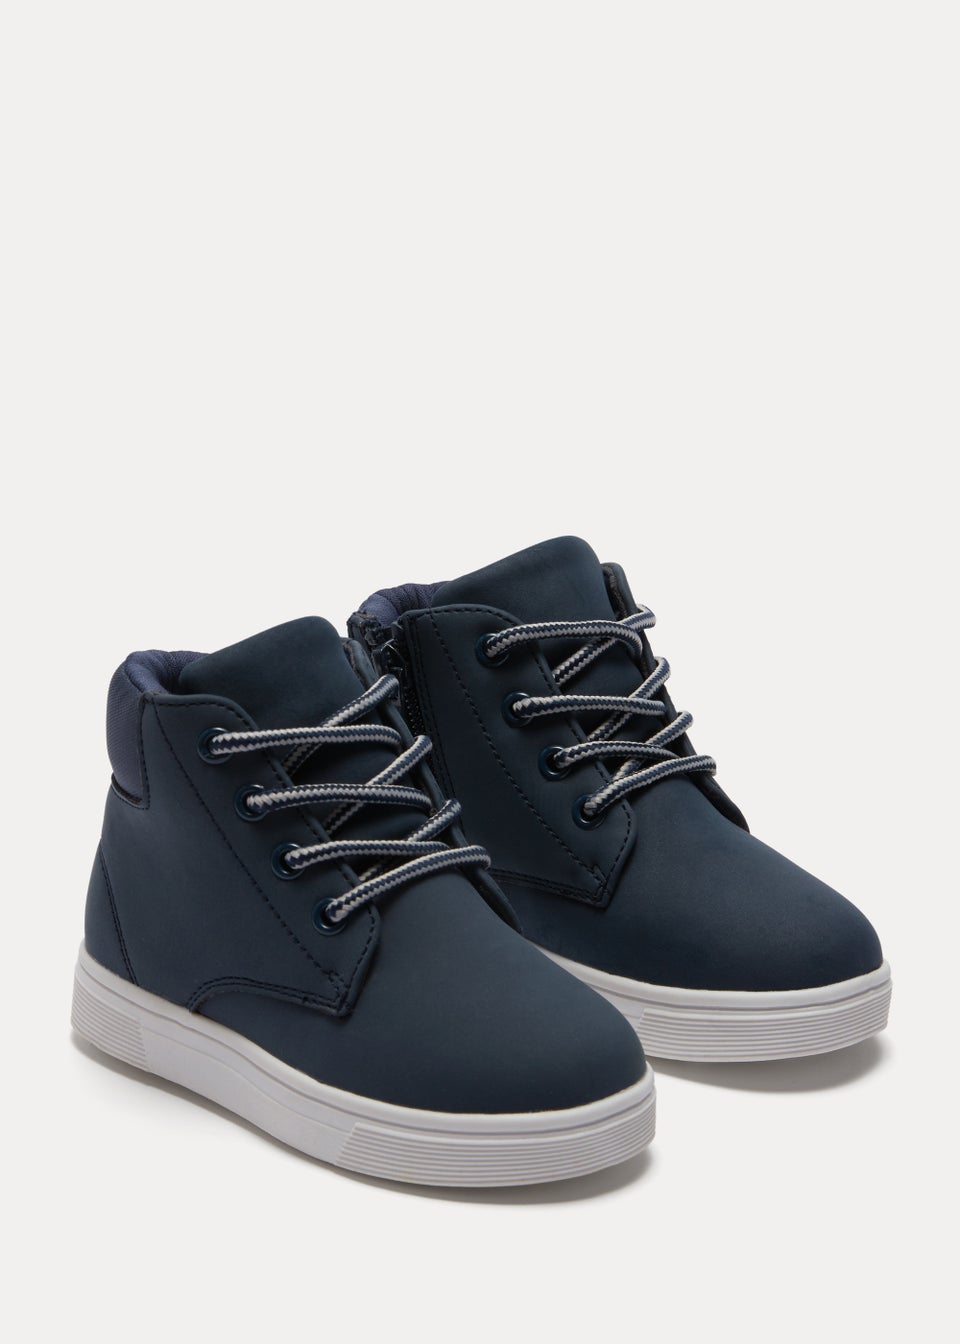 Boys Navy High Top Boots (Younger 4-12)